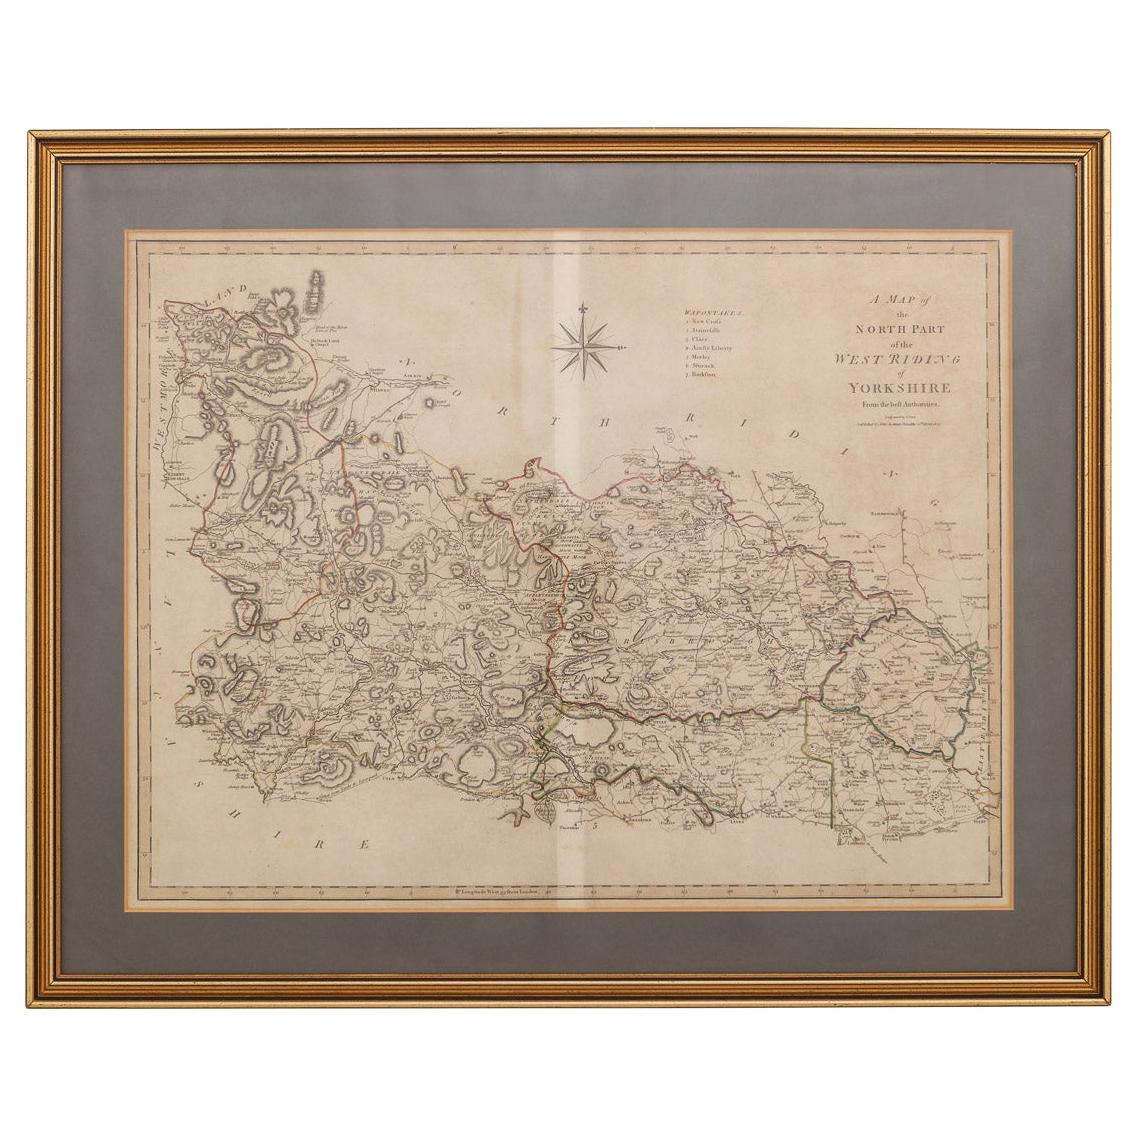 19th Century John Cary Map of North Part of West Riding of Yorkshire, C.1805 For Sale